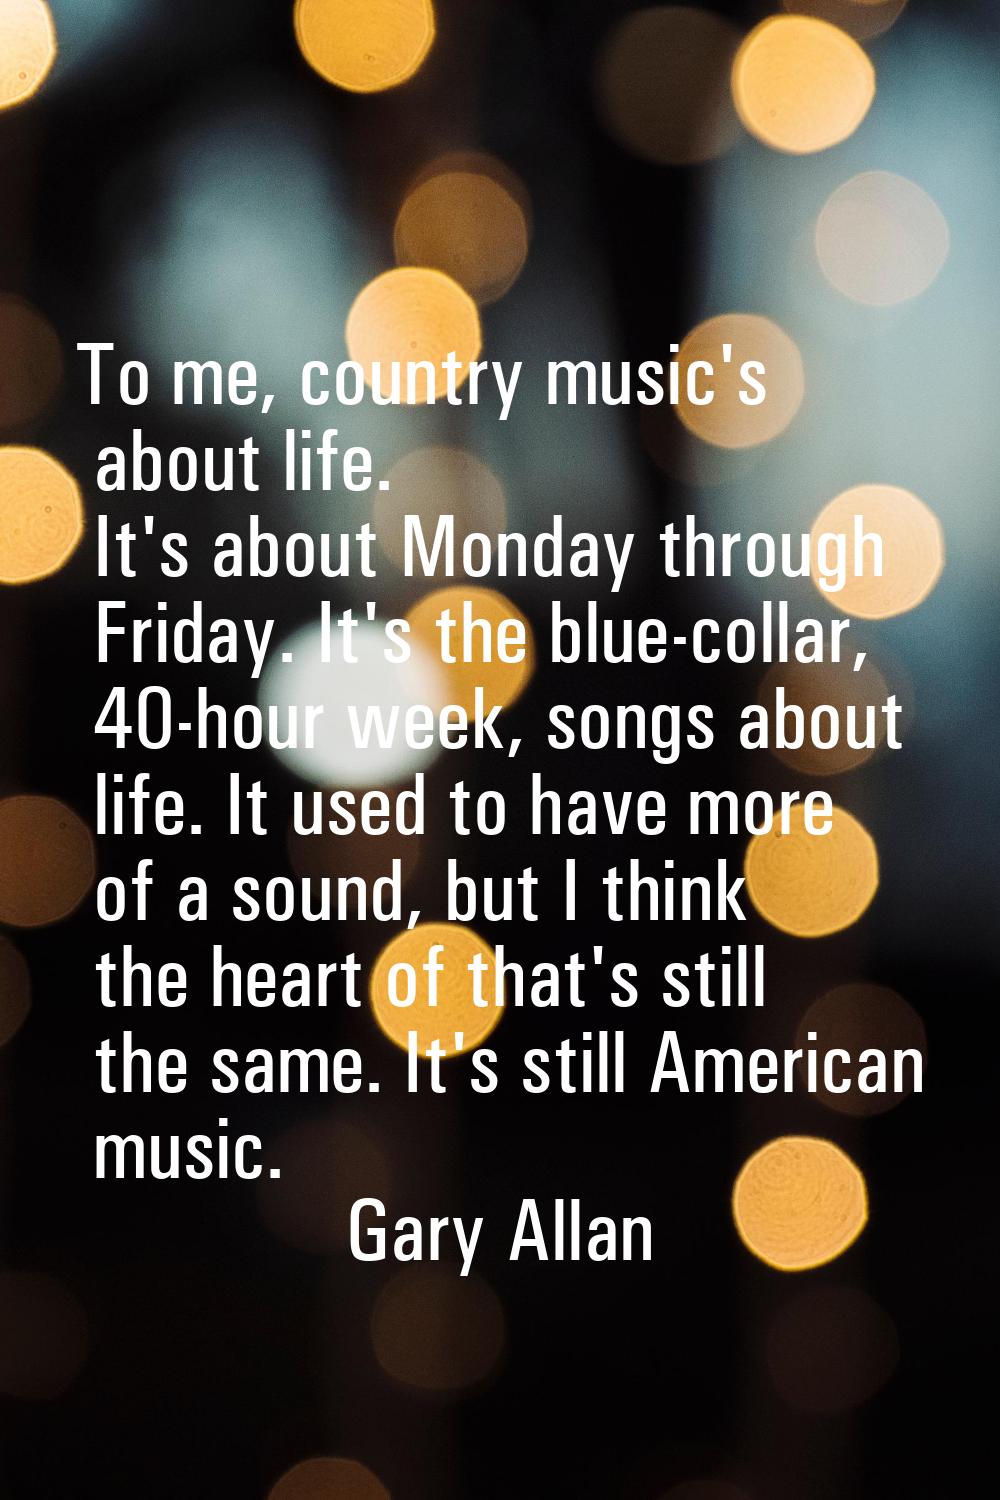 To me, country music's about life. It's about Monday through Friday. It's the blue-collar, 40-hour 